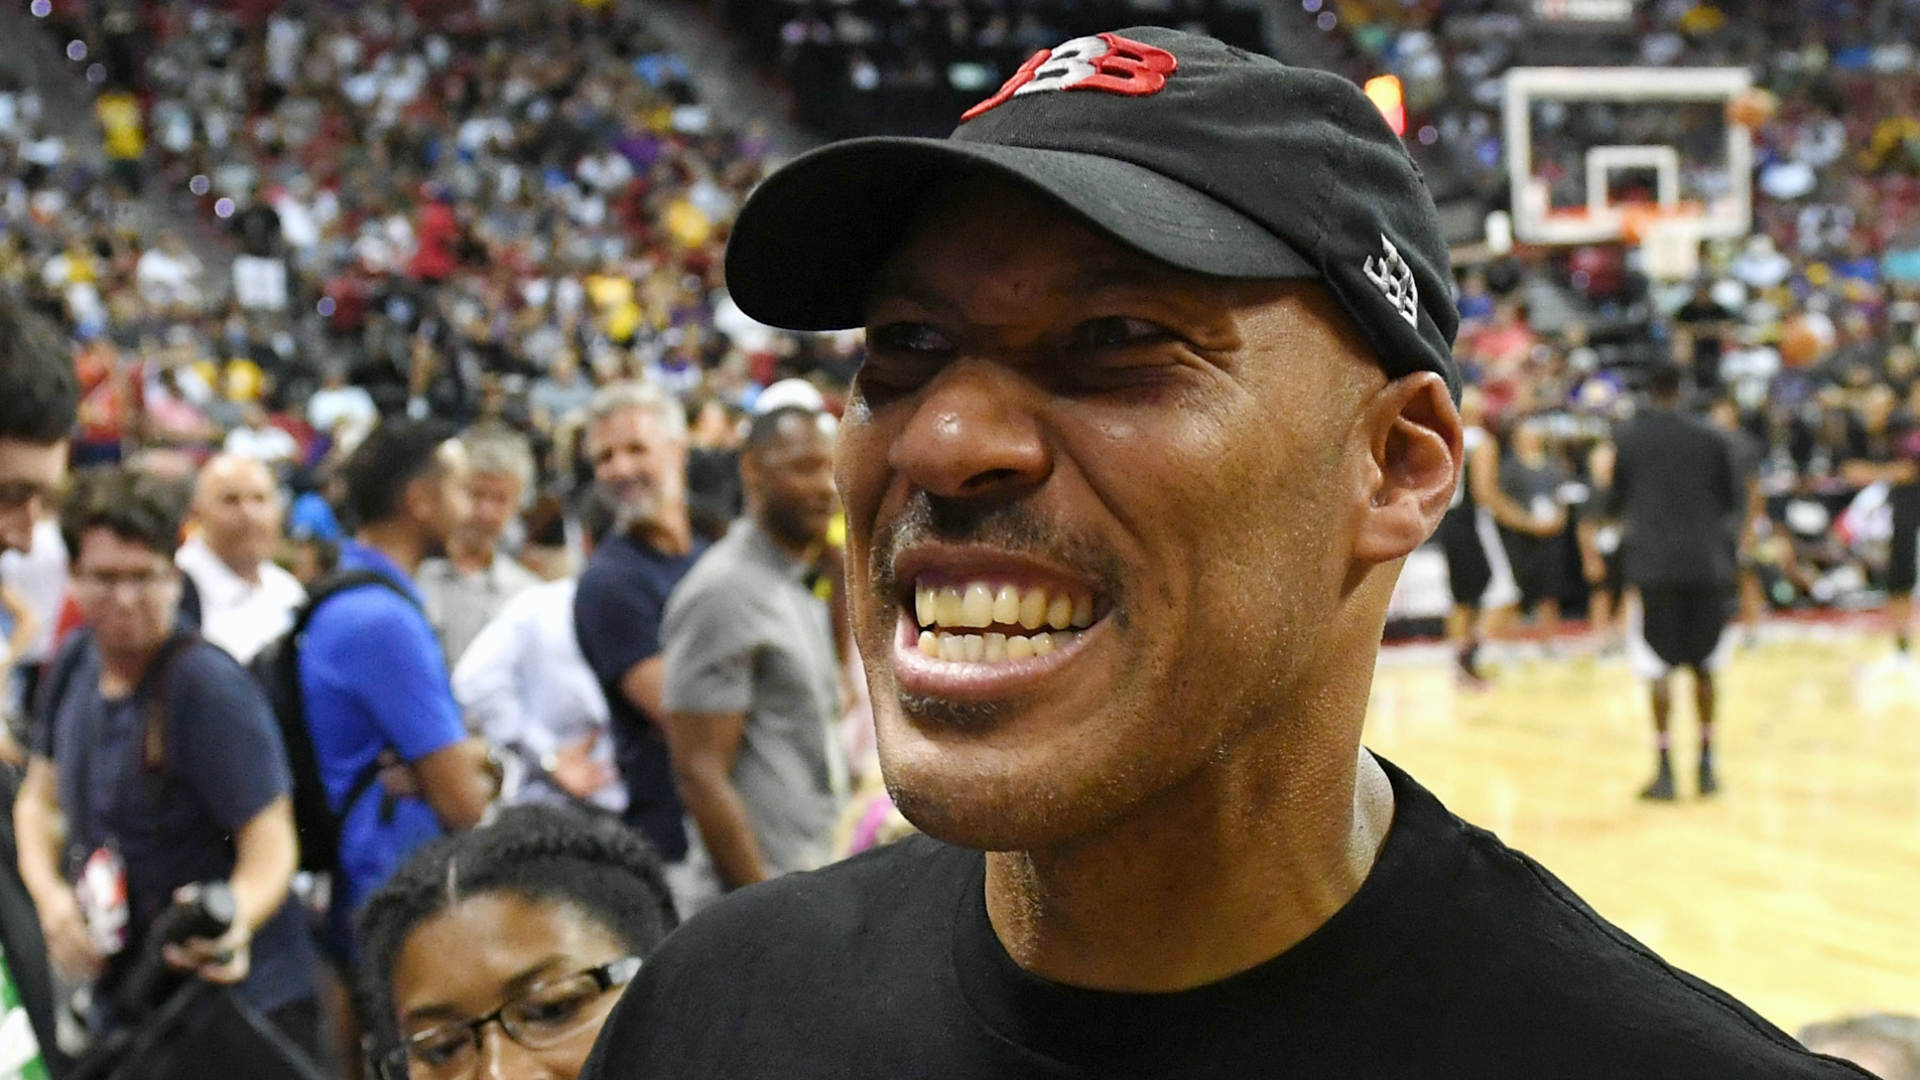 LeBron James will win championships with the Los Angeles Lakers, according to LaVar Ball.